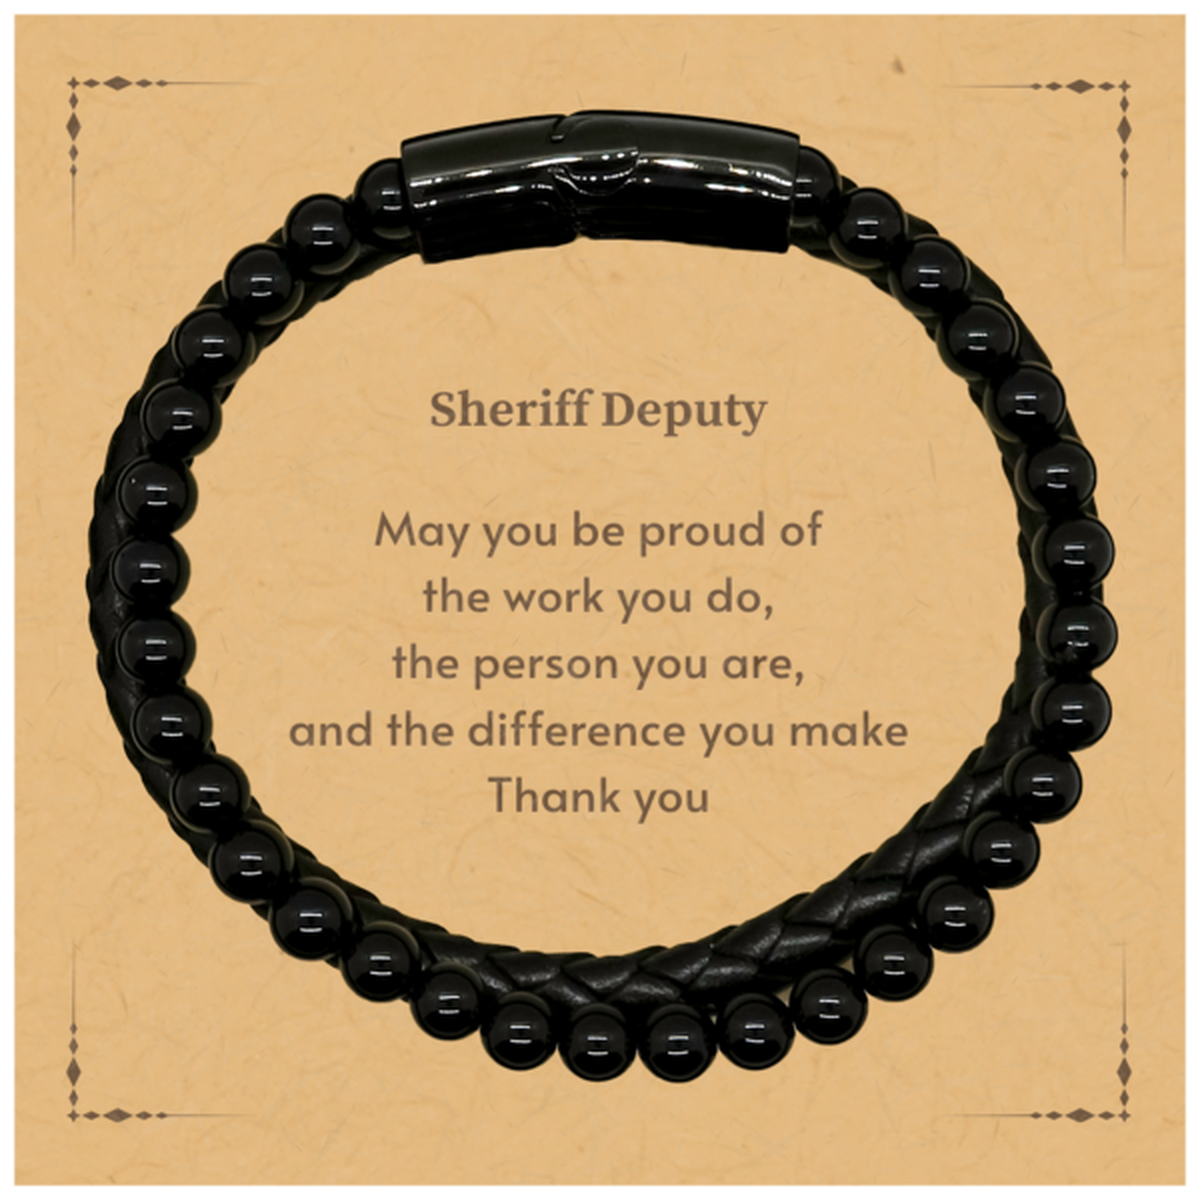 Heartwarming Stone Leather Bracelets Retirement Coworkers Gifts for Sheriff Deputy, Sheriff Deputy May You be proud of the work you do, the person you are Gifts for Boss Men Women Friends